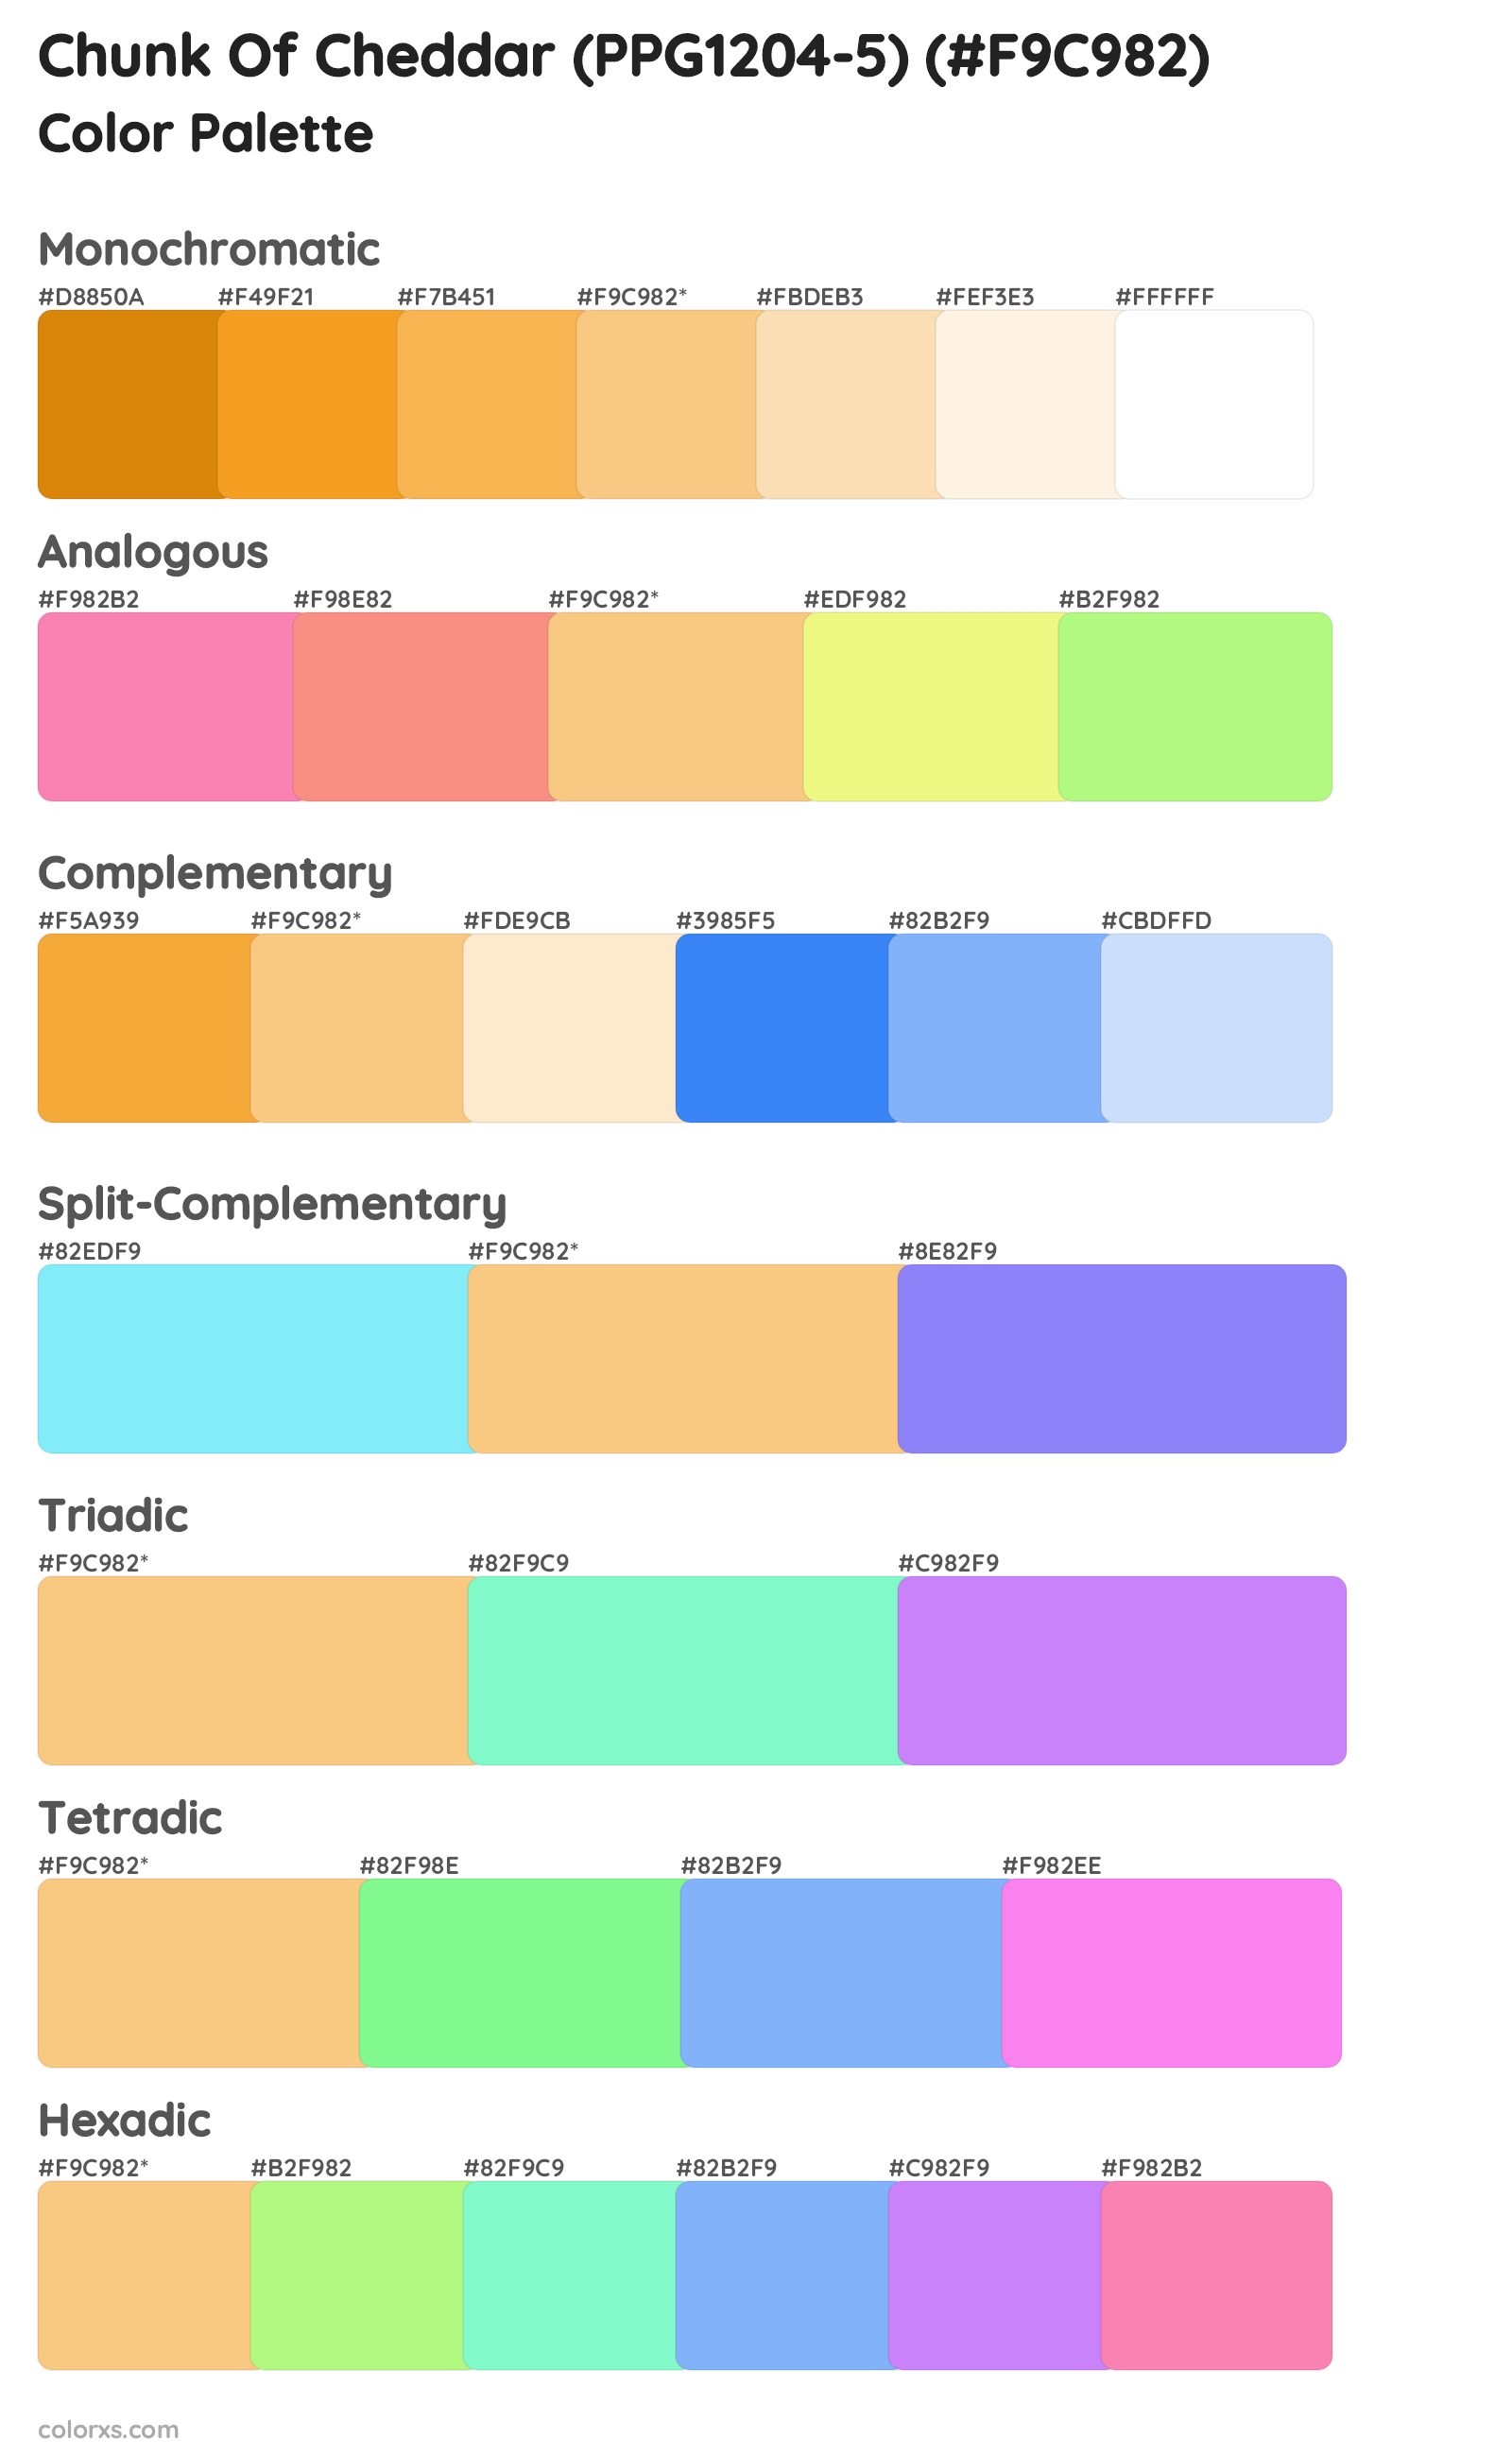 Chunk Of Cheddar (PPG1204-5) Color Scheme Palettes